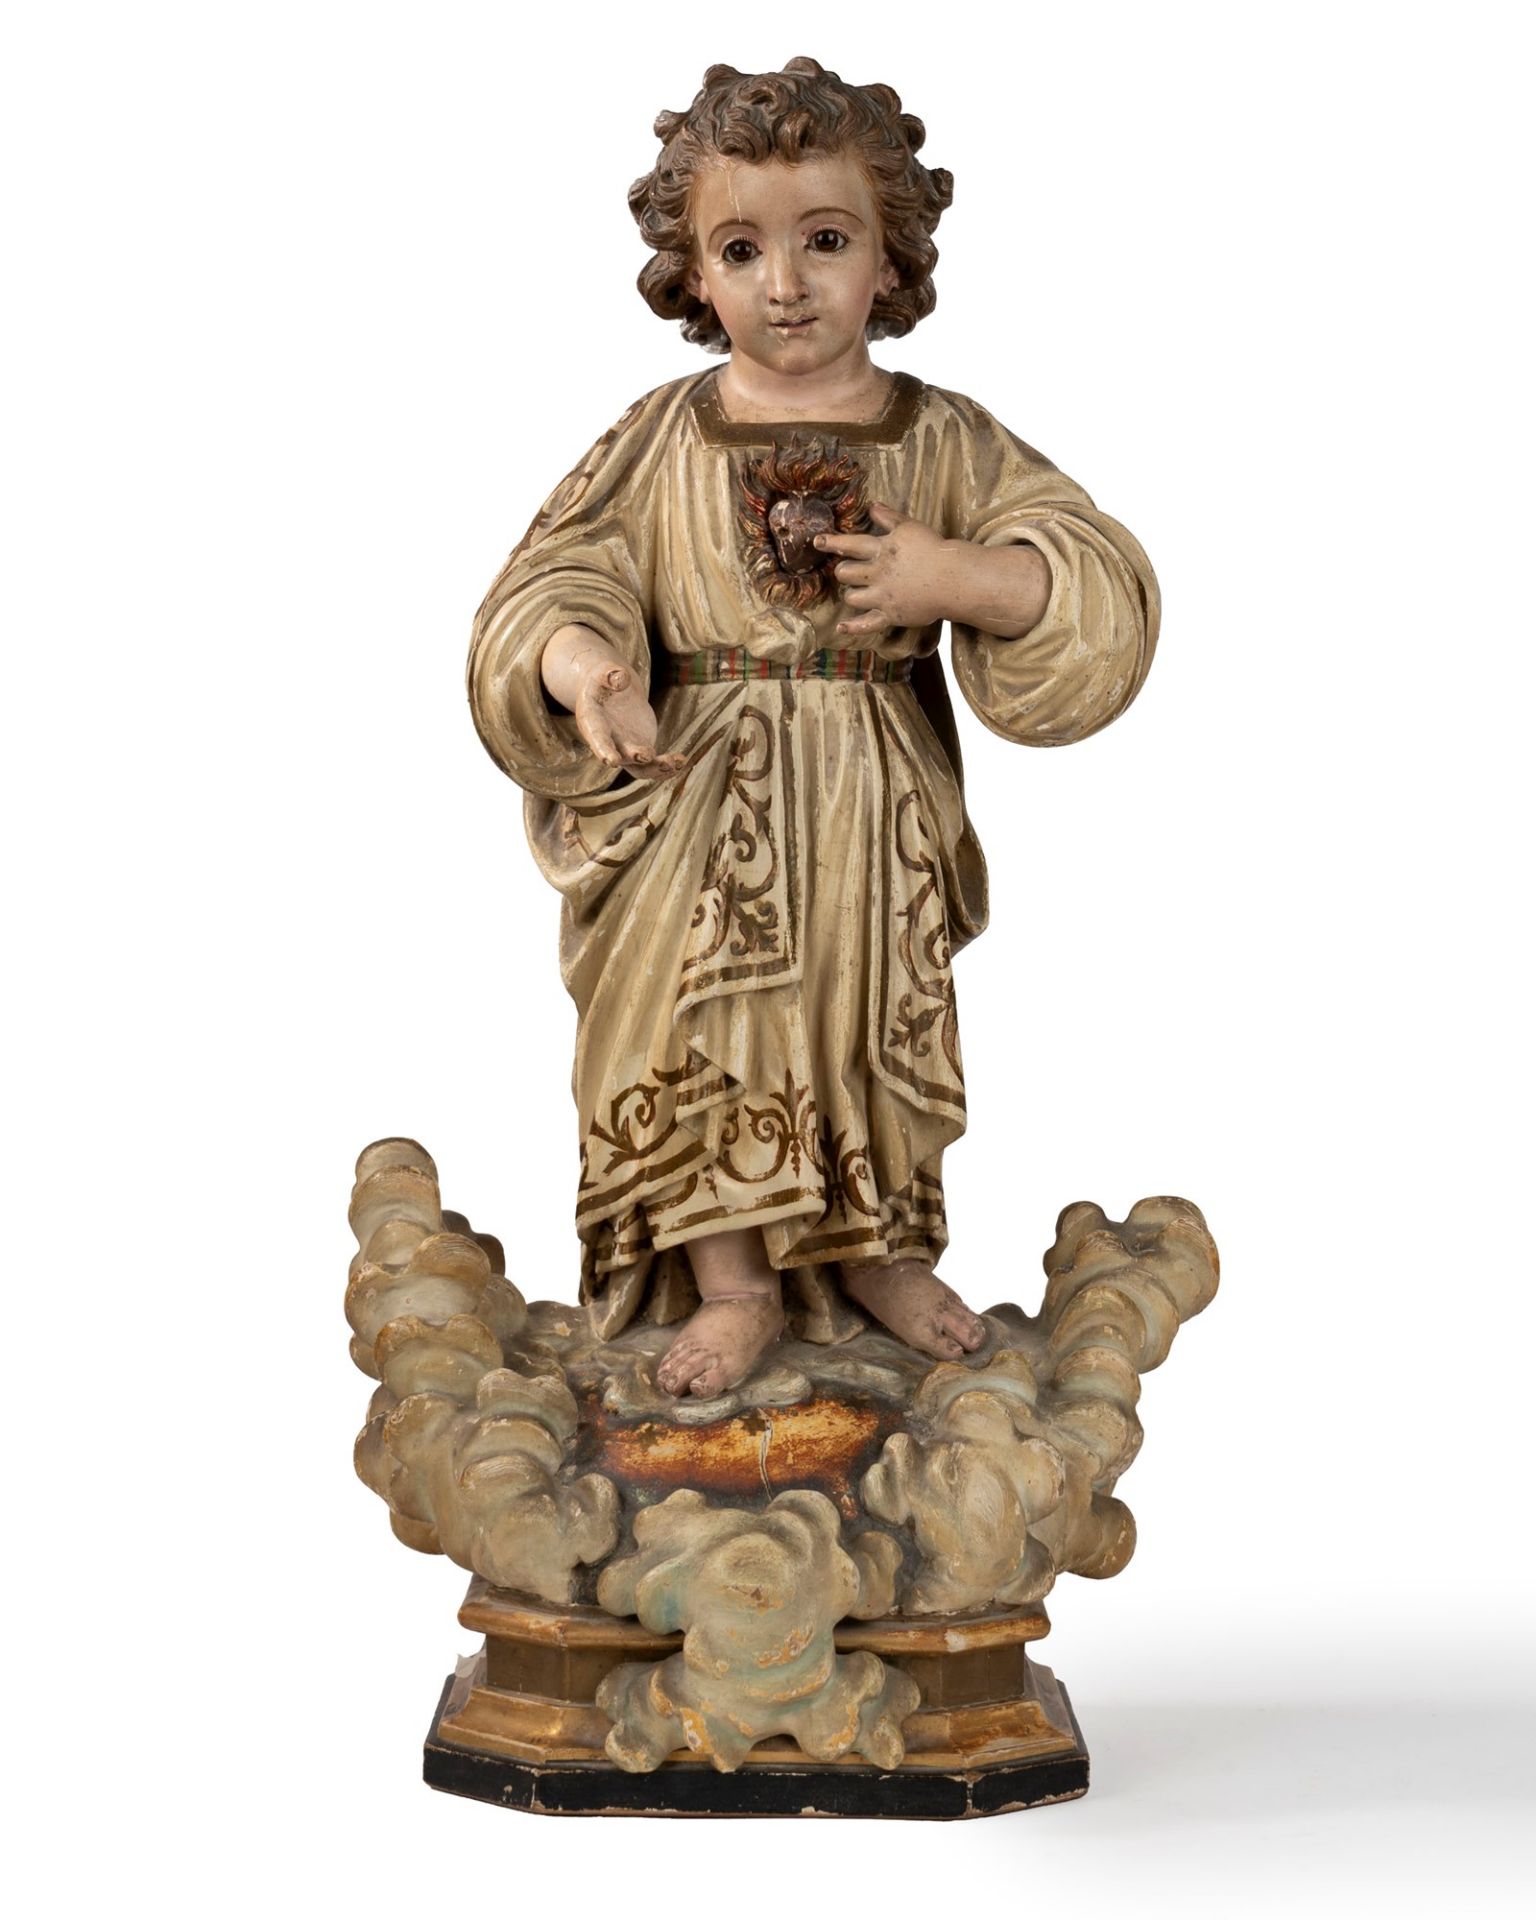 Baby Jesus in carved and lacquered wood, 19th century